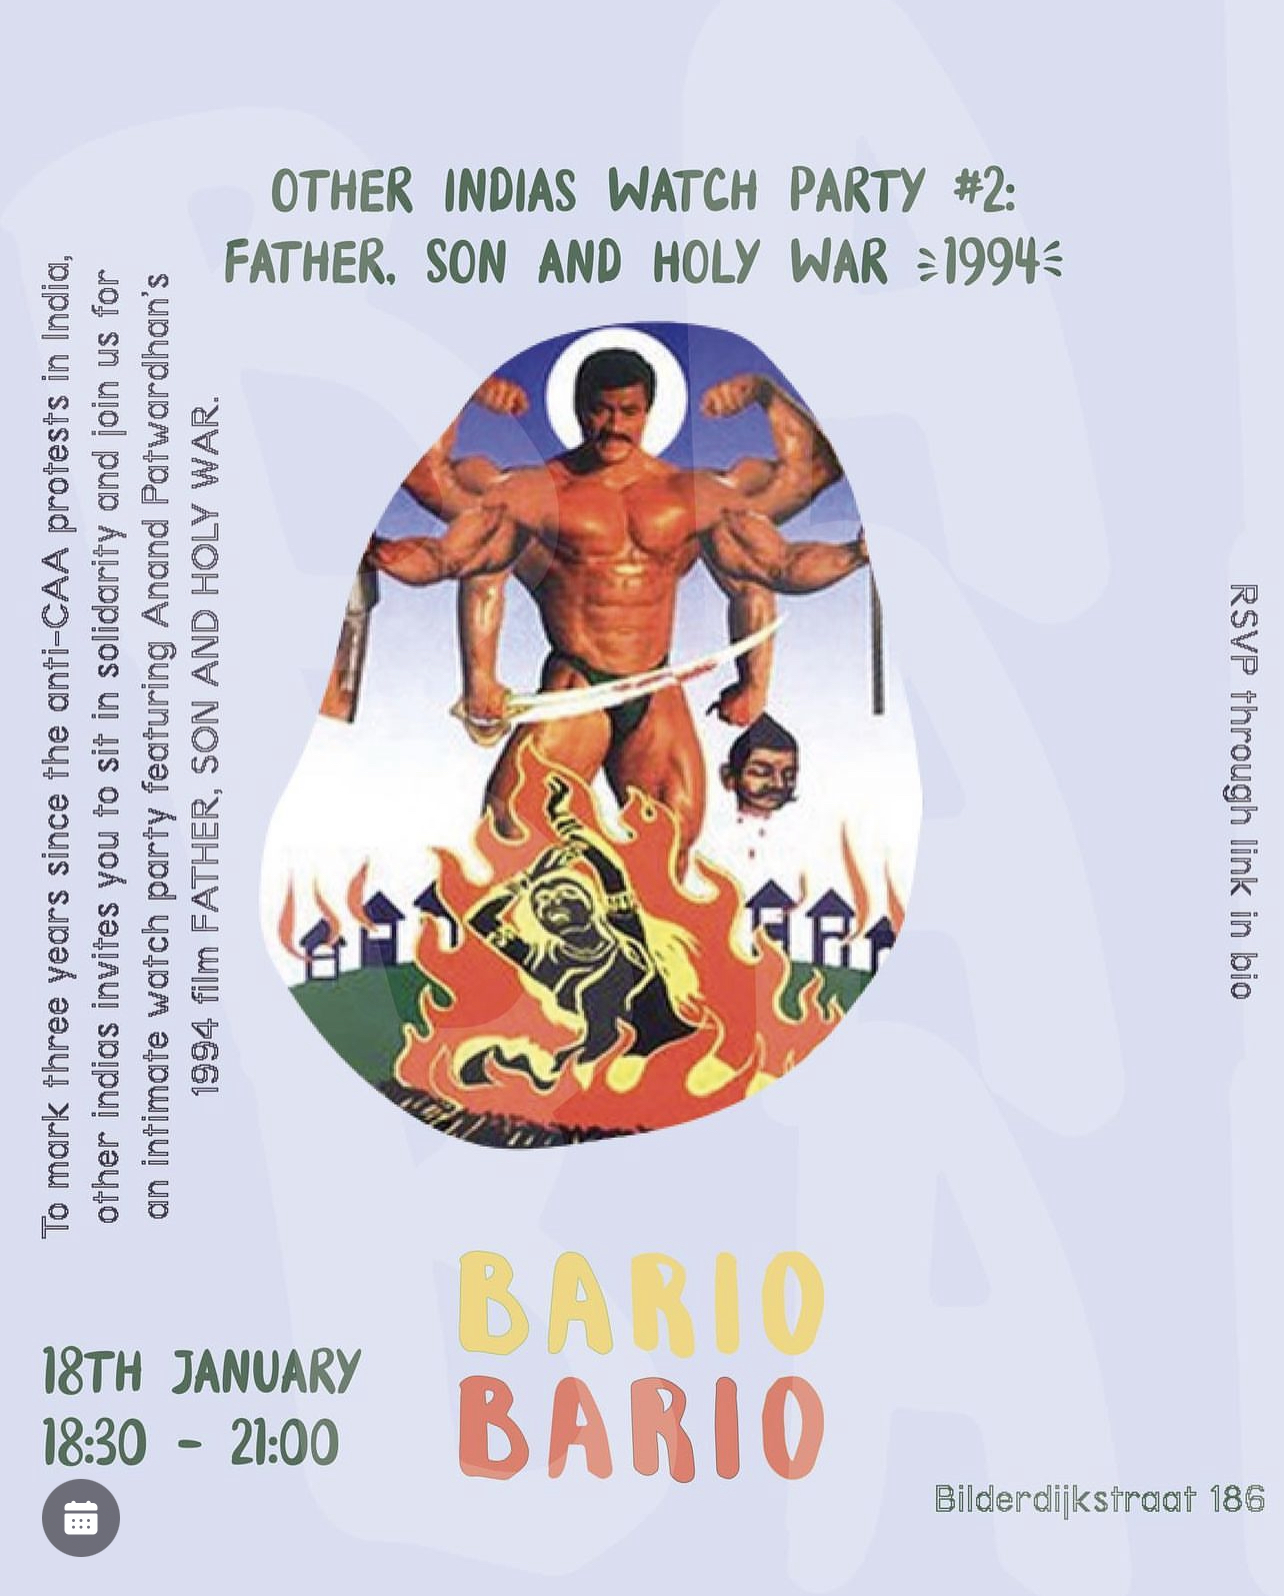 OTHER INDIAS WATCH PARTY #2 : FATHER. SON AND HOLY WAR "19945"